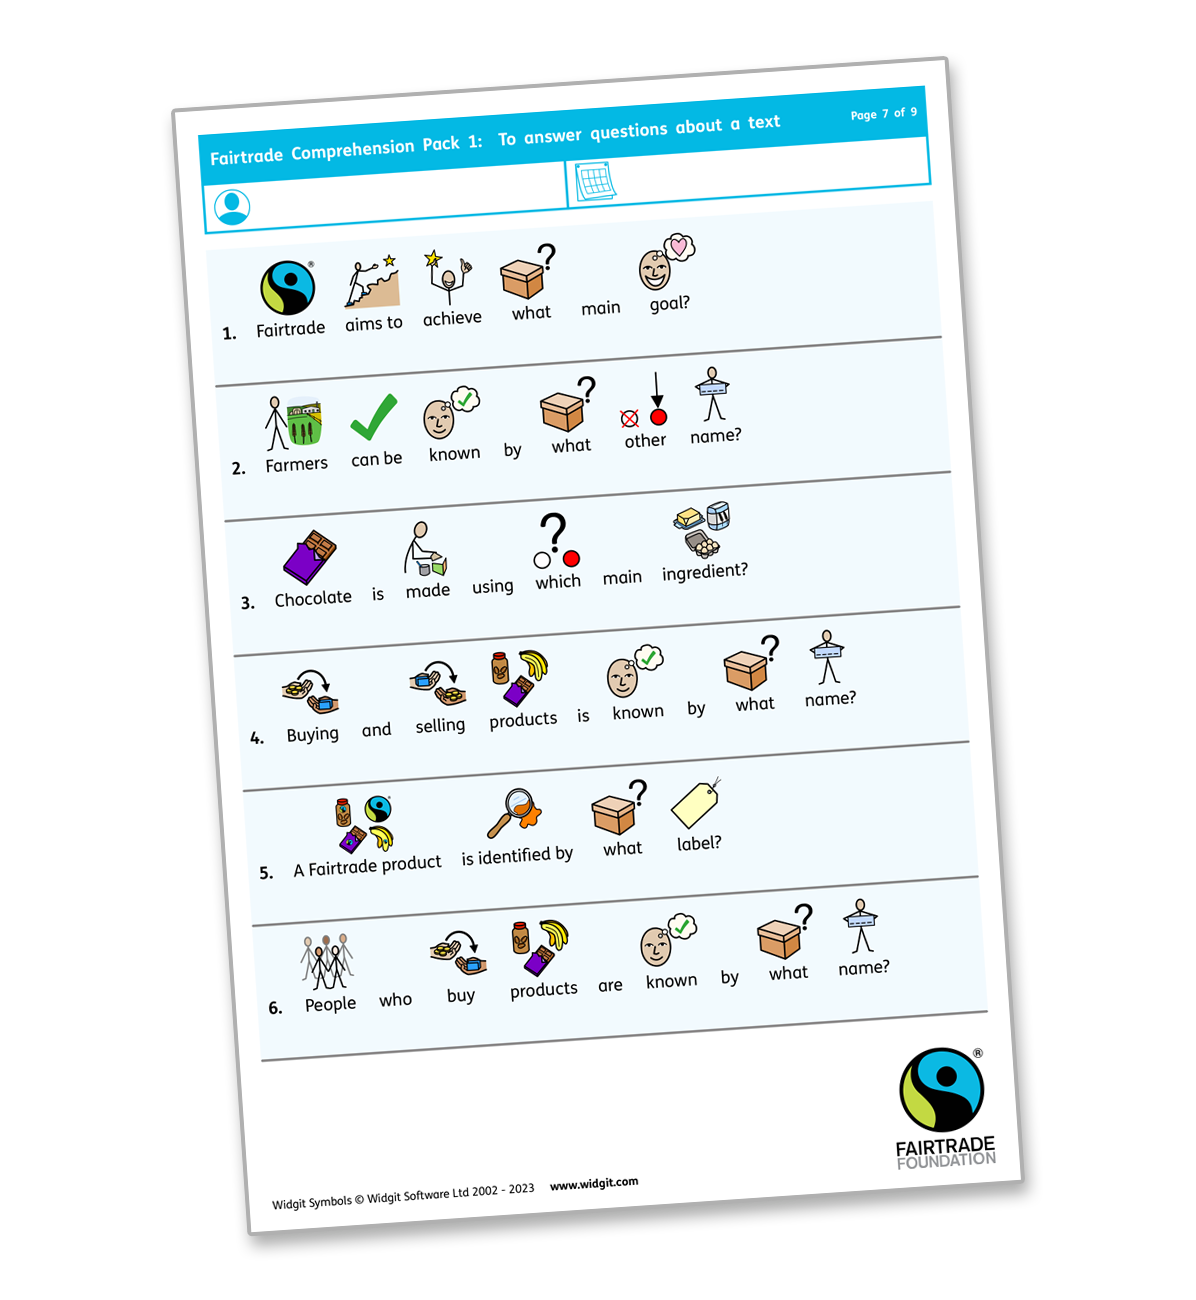 Fairtrade Comprehension Pack 1